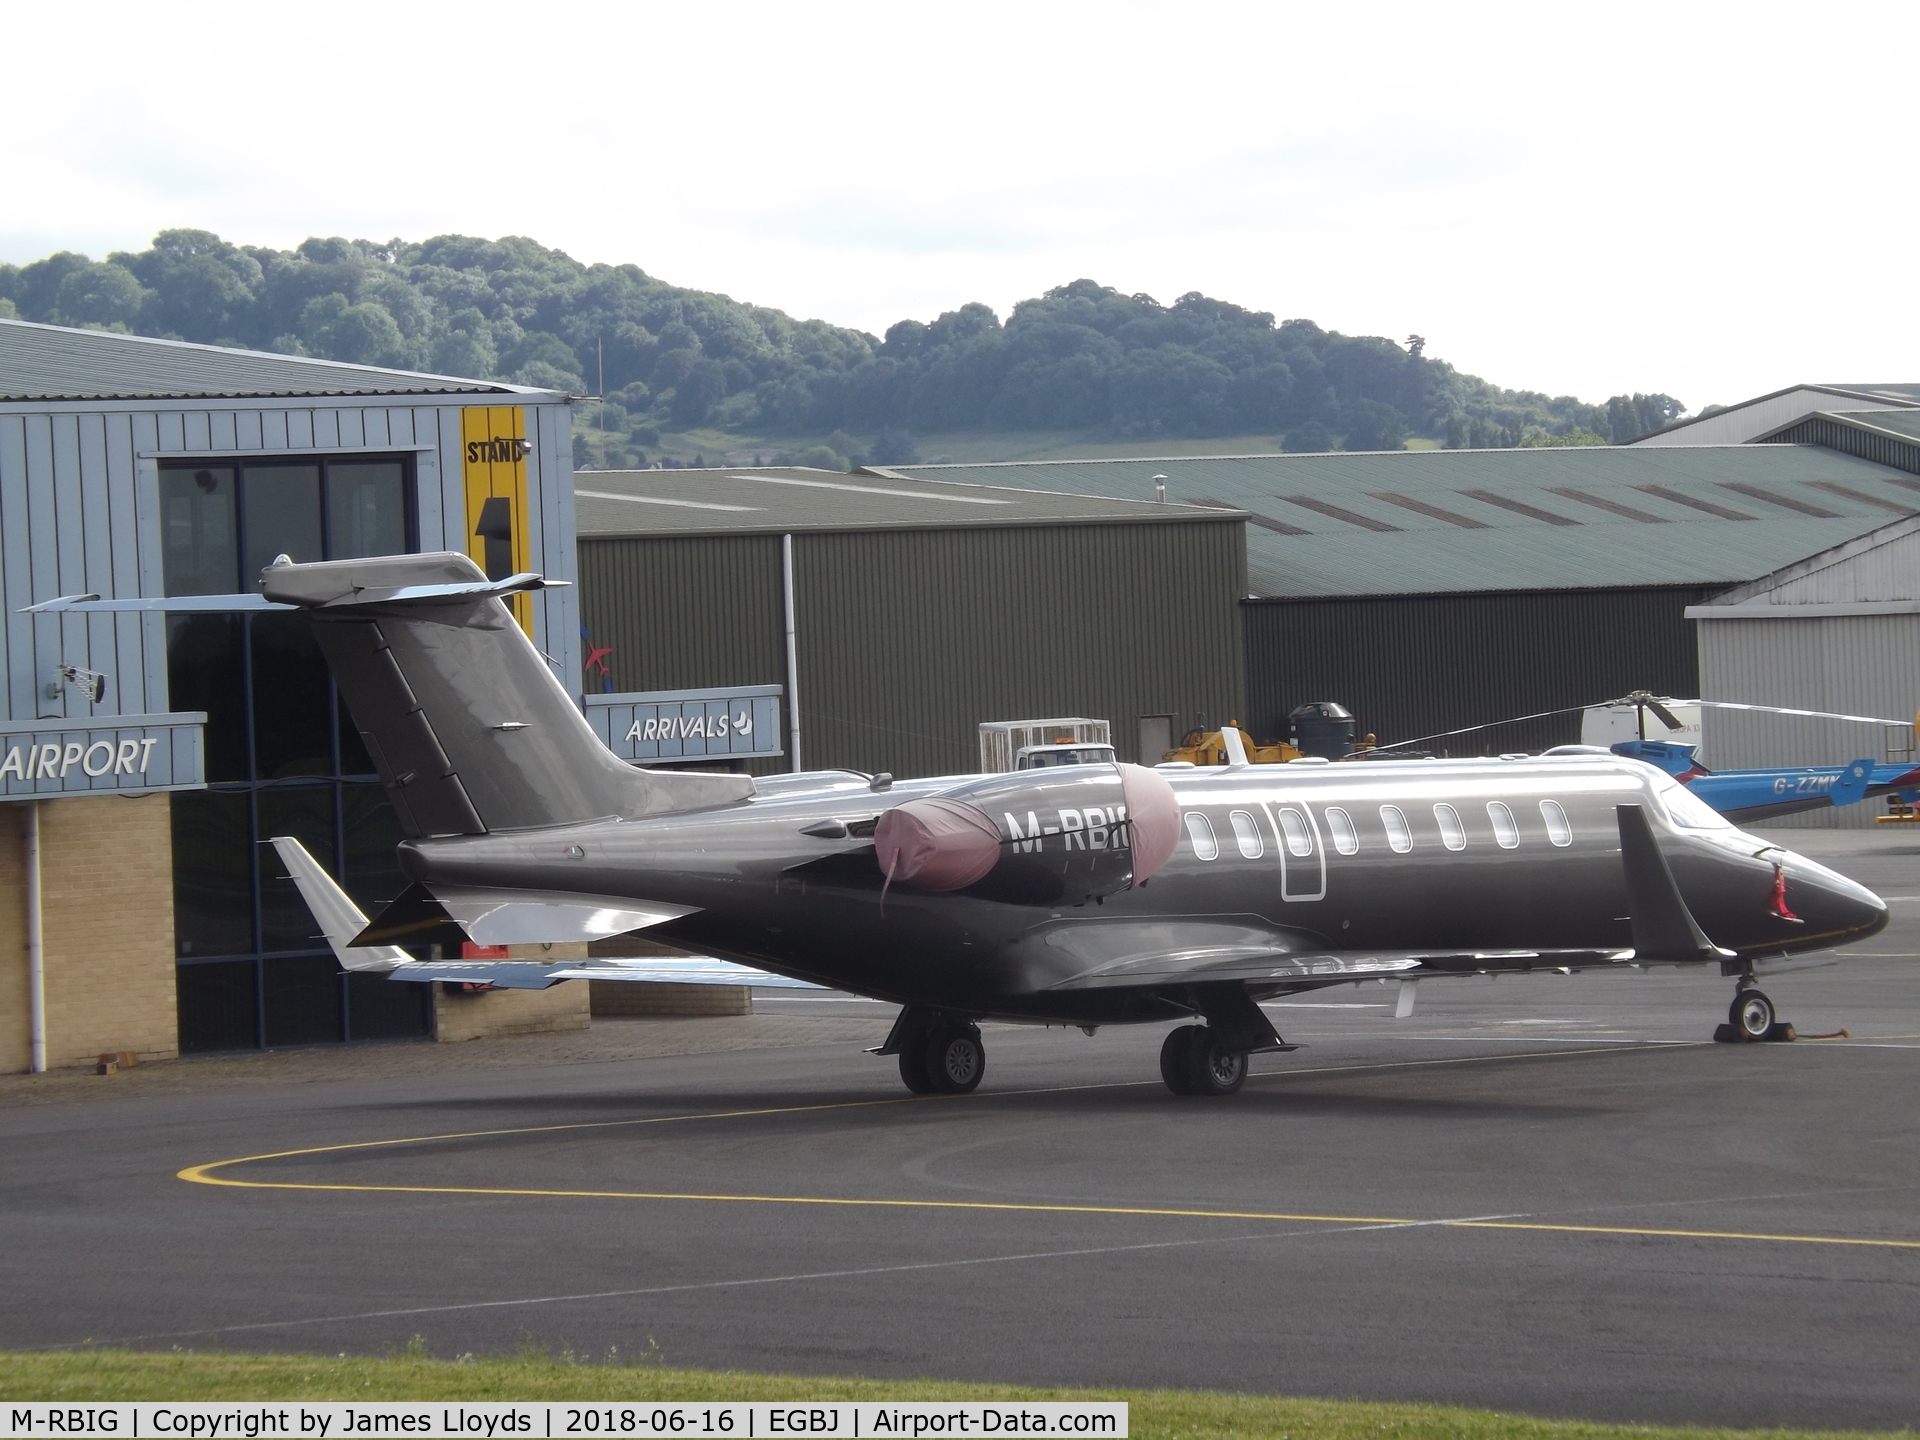 M-RBIG, 2005 Learjet 45 C/N 45-280, Parked up at Gloucestershire Airprot.